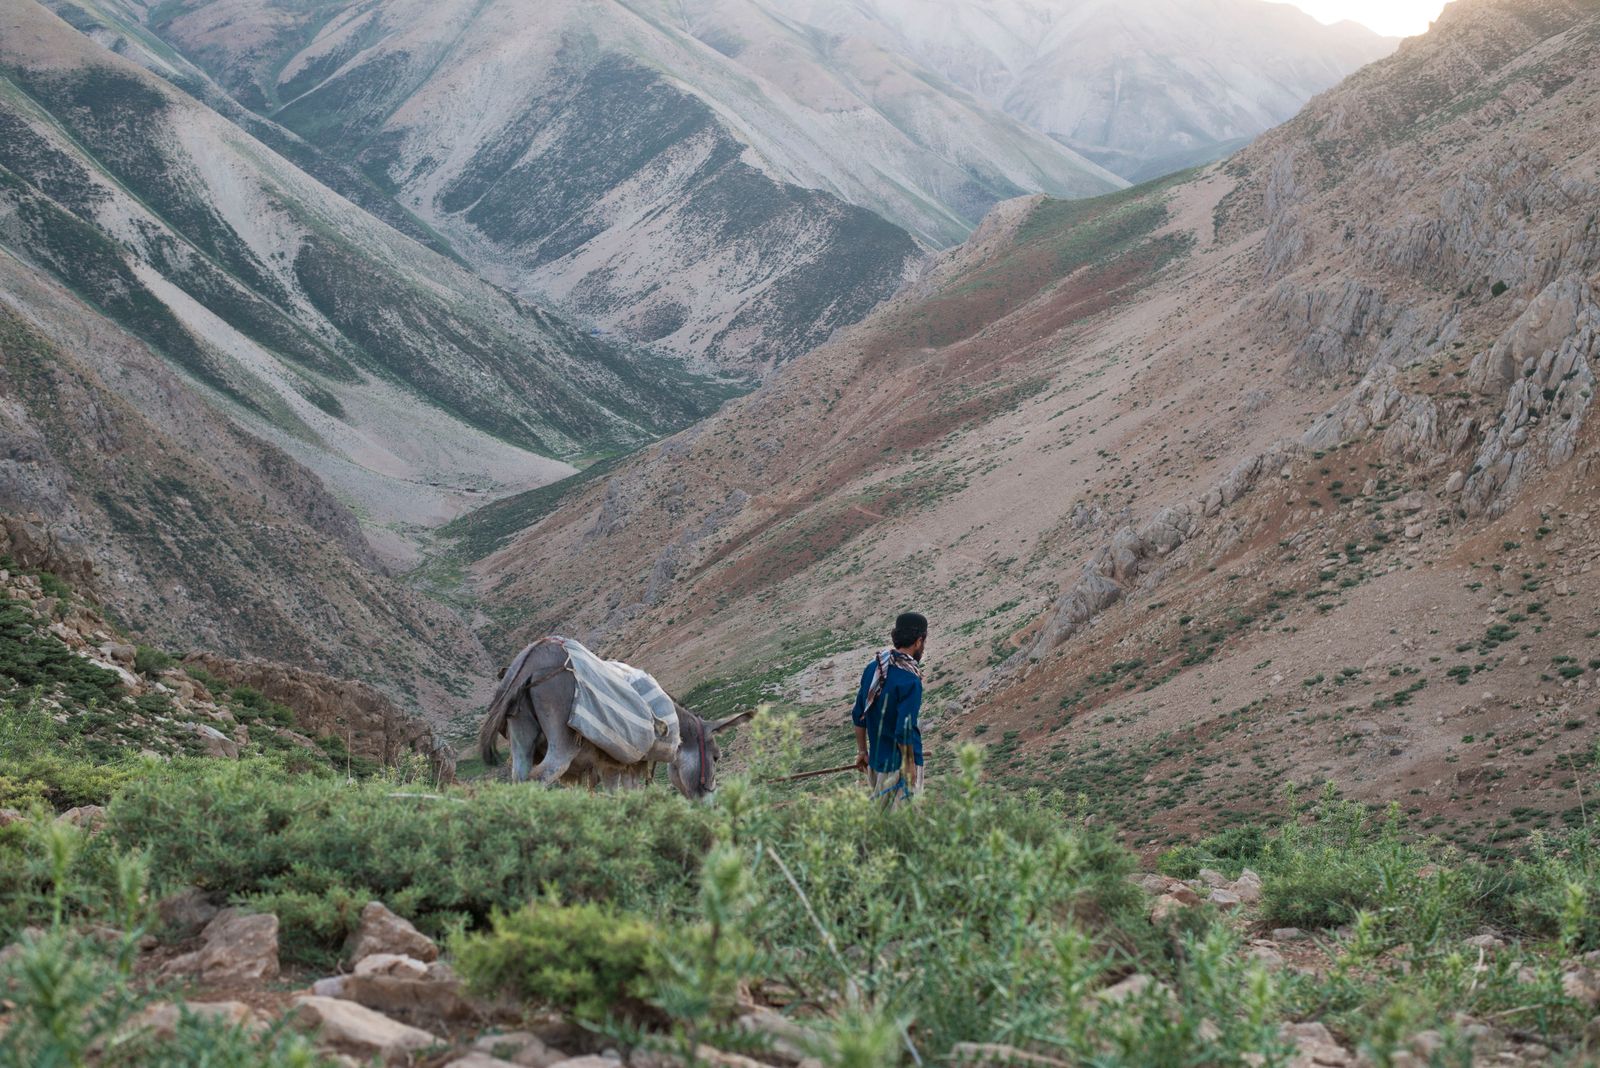 © Rachele Caretti - Image from the Nomads of Iran photography project